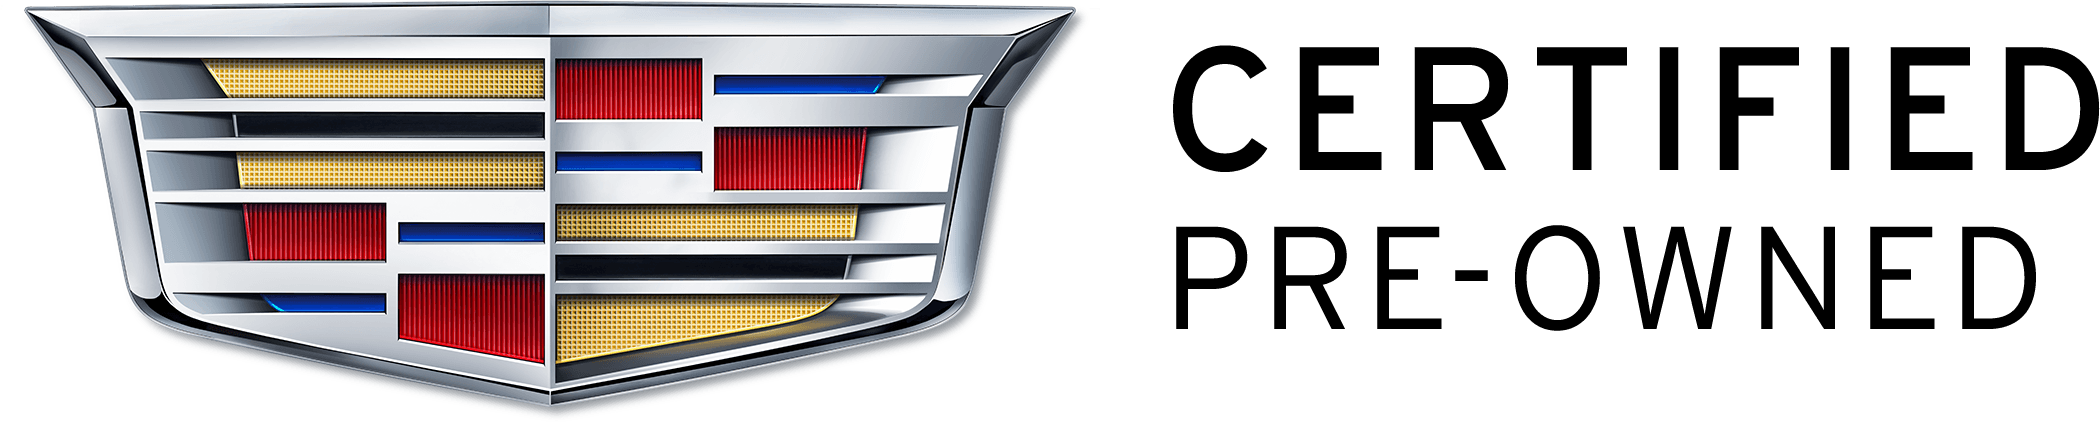 Certified Cadillac Logo - Cadillac Certified Pre-Owned Vehicles | Used Cars | Hennessy ...